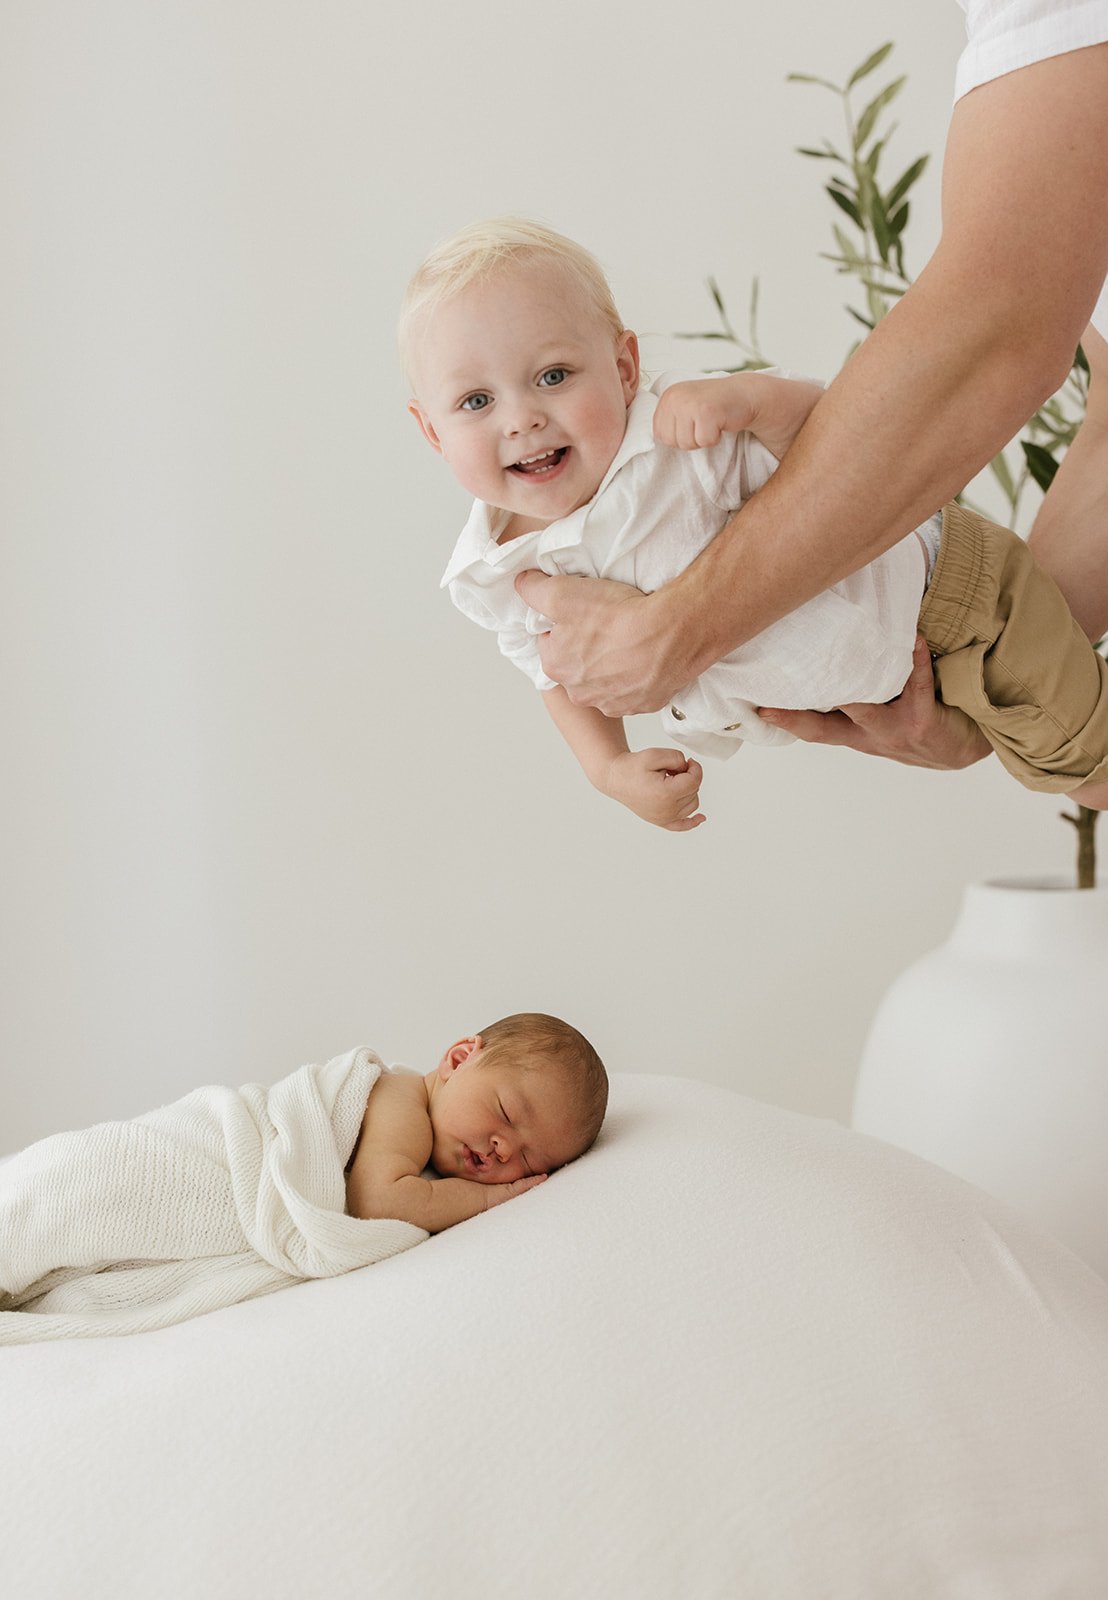 A toddler is flying over their newborn baby sibling in dads arms. He is giving the photographer a big cheesy grin. 